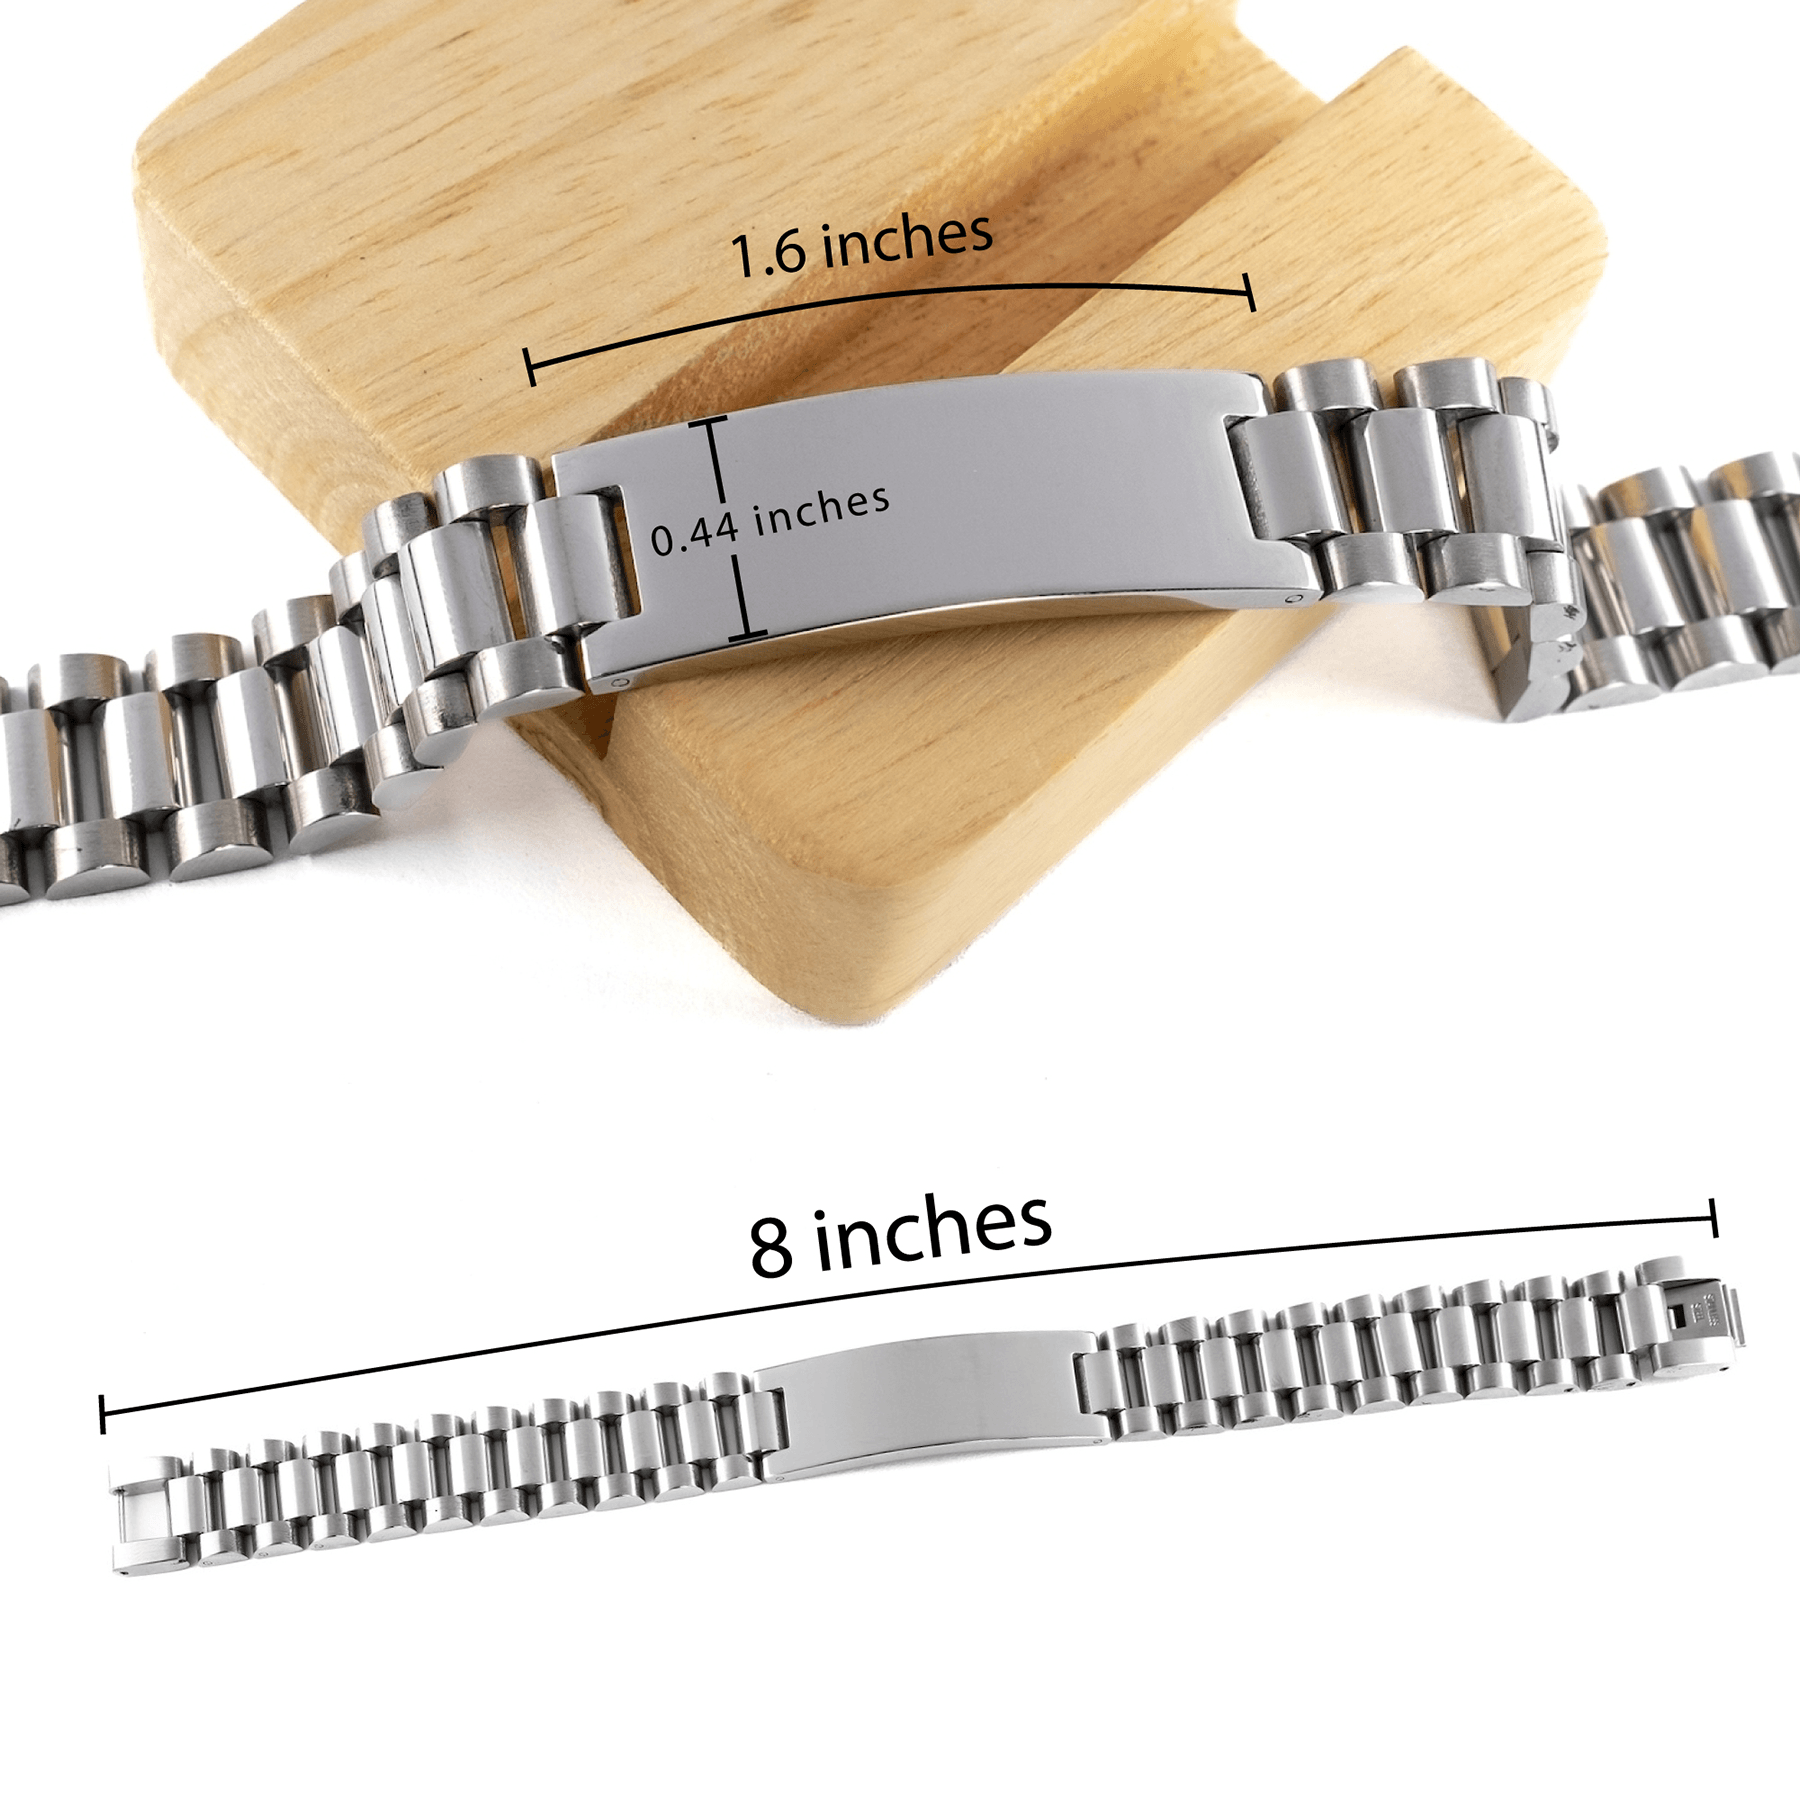 To My Son Gifts, Inspirational Son Ladder Stainless Steel Bracelet, Sentimental Birthday Christmas Unique Gifts For Son Behind you, all your memories, before you, all your dreams, around you, all who love you, within you, all you need - Mallard Moon Gift Shop